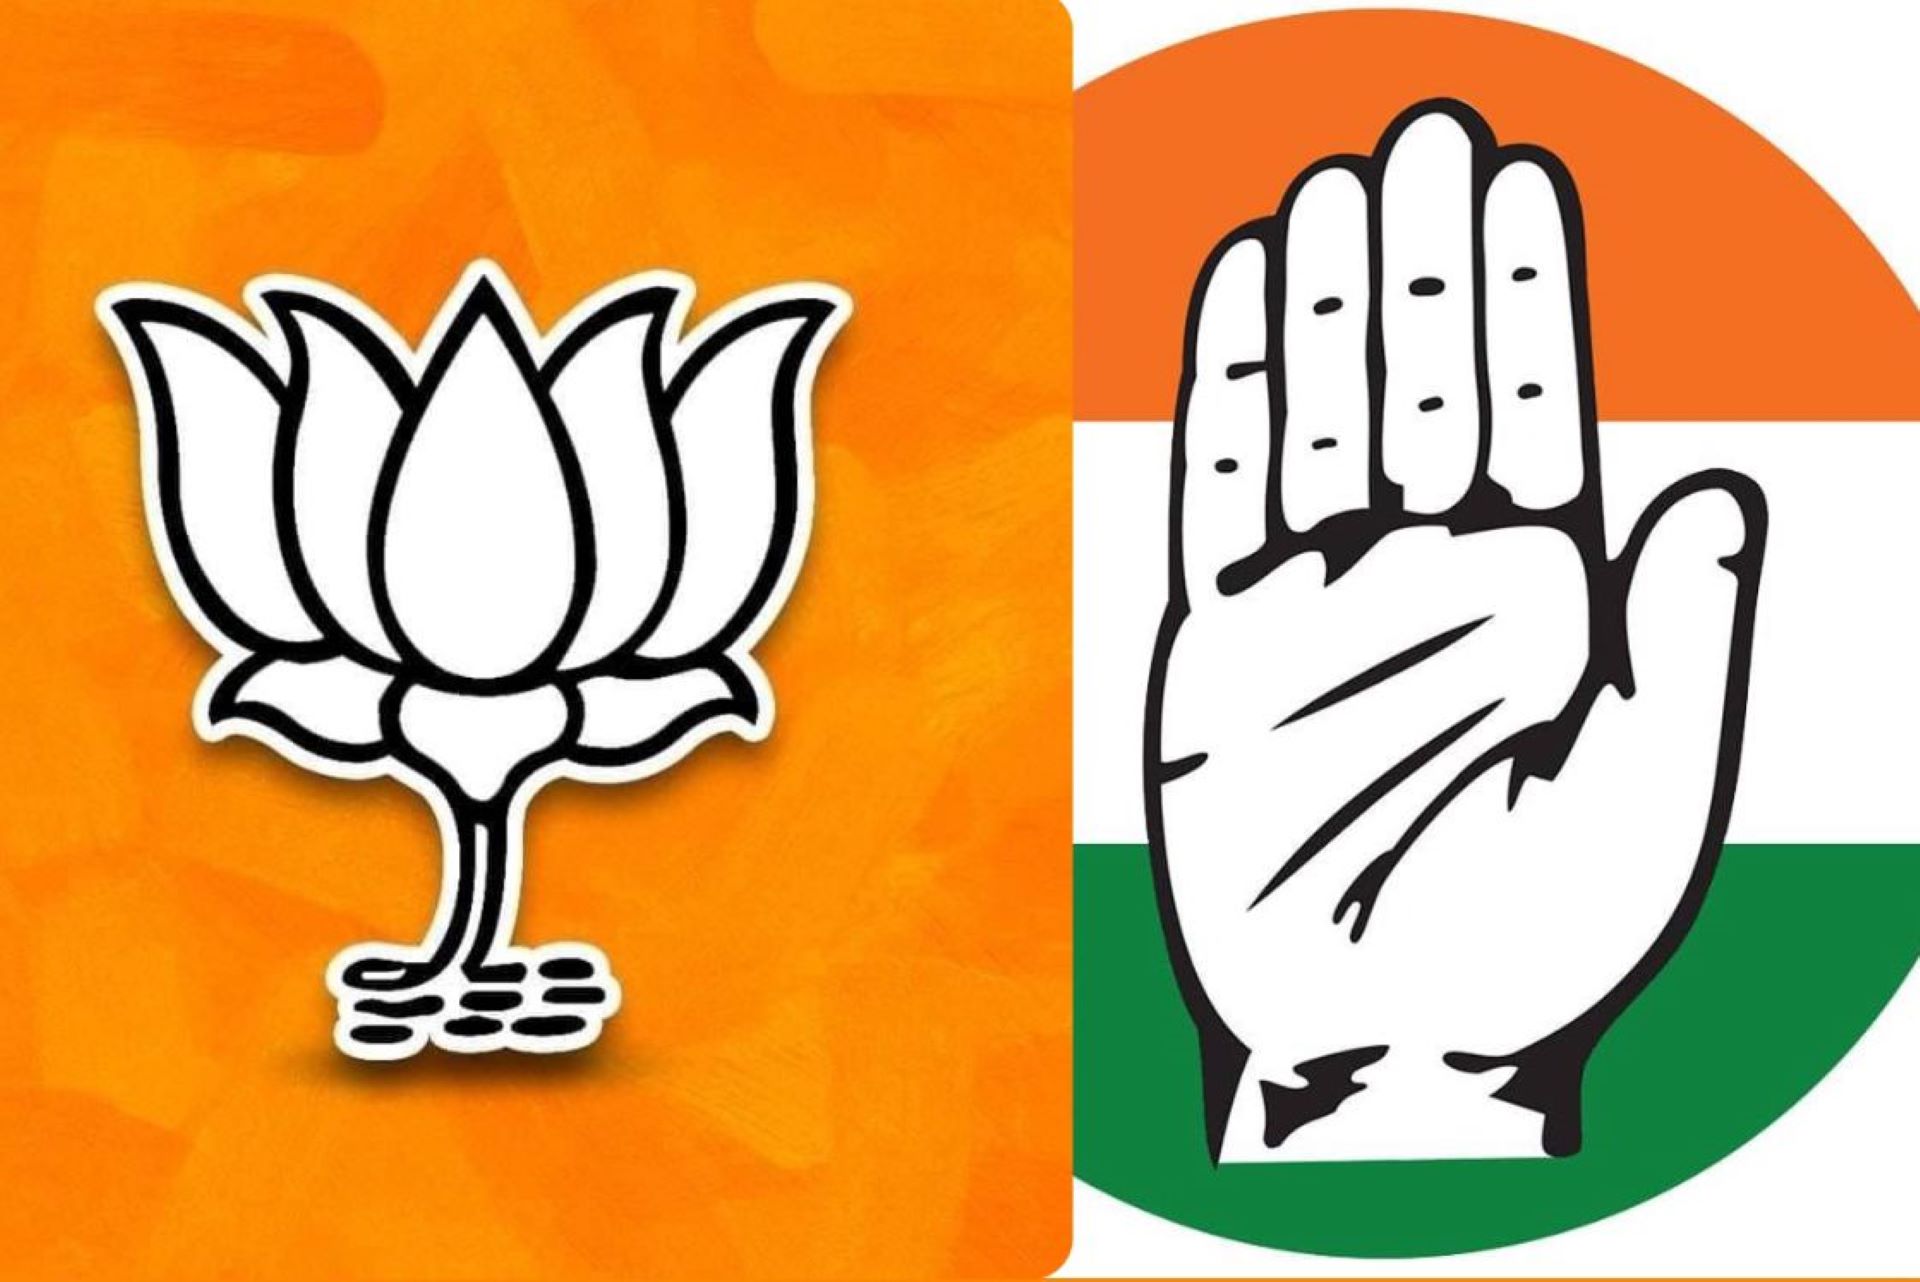 Congress Gains Momentum, BJP Faces Setback Ahead of Haryana Assembly Polls